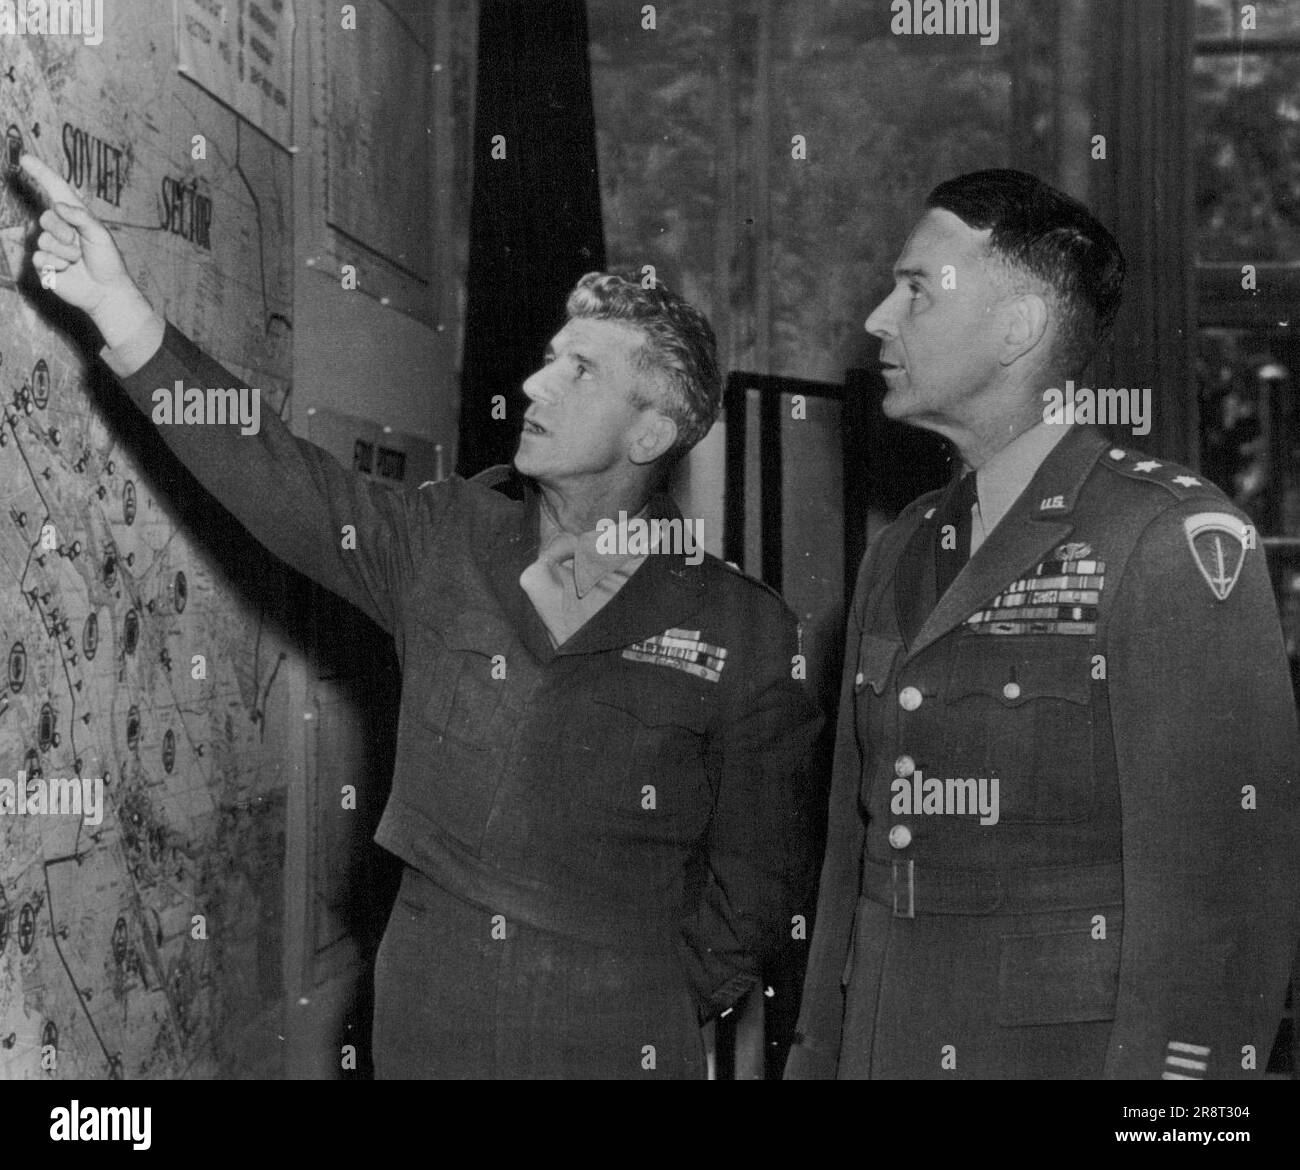 Maj. Gen. Maxwell D. Taylor (right), named officially yesterday to command the American Military Government and the Army forces in Berlin, and Brig. Gen. Frank Howley, look at a map of Berlin in headquarters there on Tuesday. General Taylor, wartime paratroop leader, succeeds Howley as commandant and Col. James T. Duke as commander of the Berlin military a post. The double authority was given him 'in order to unify the United States position in Berlin.' August 7, 1949. (Photo by AP Wirephoto). Stock Photo